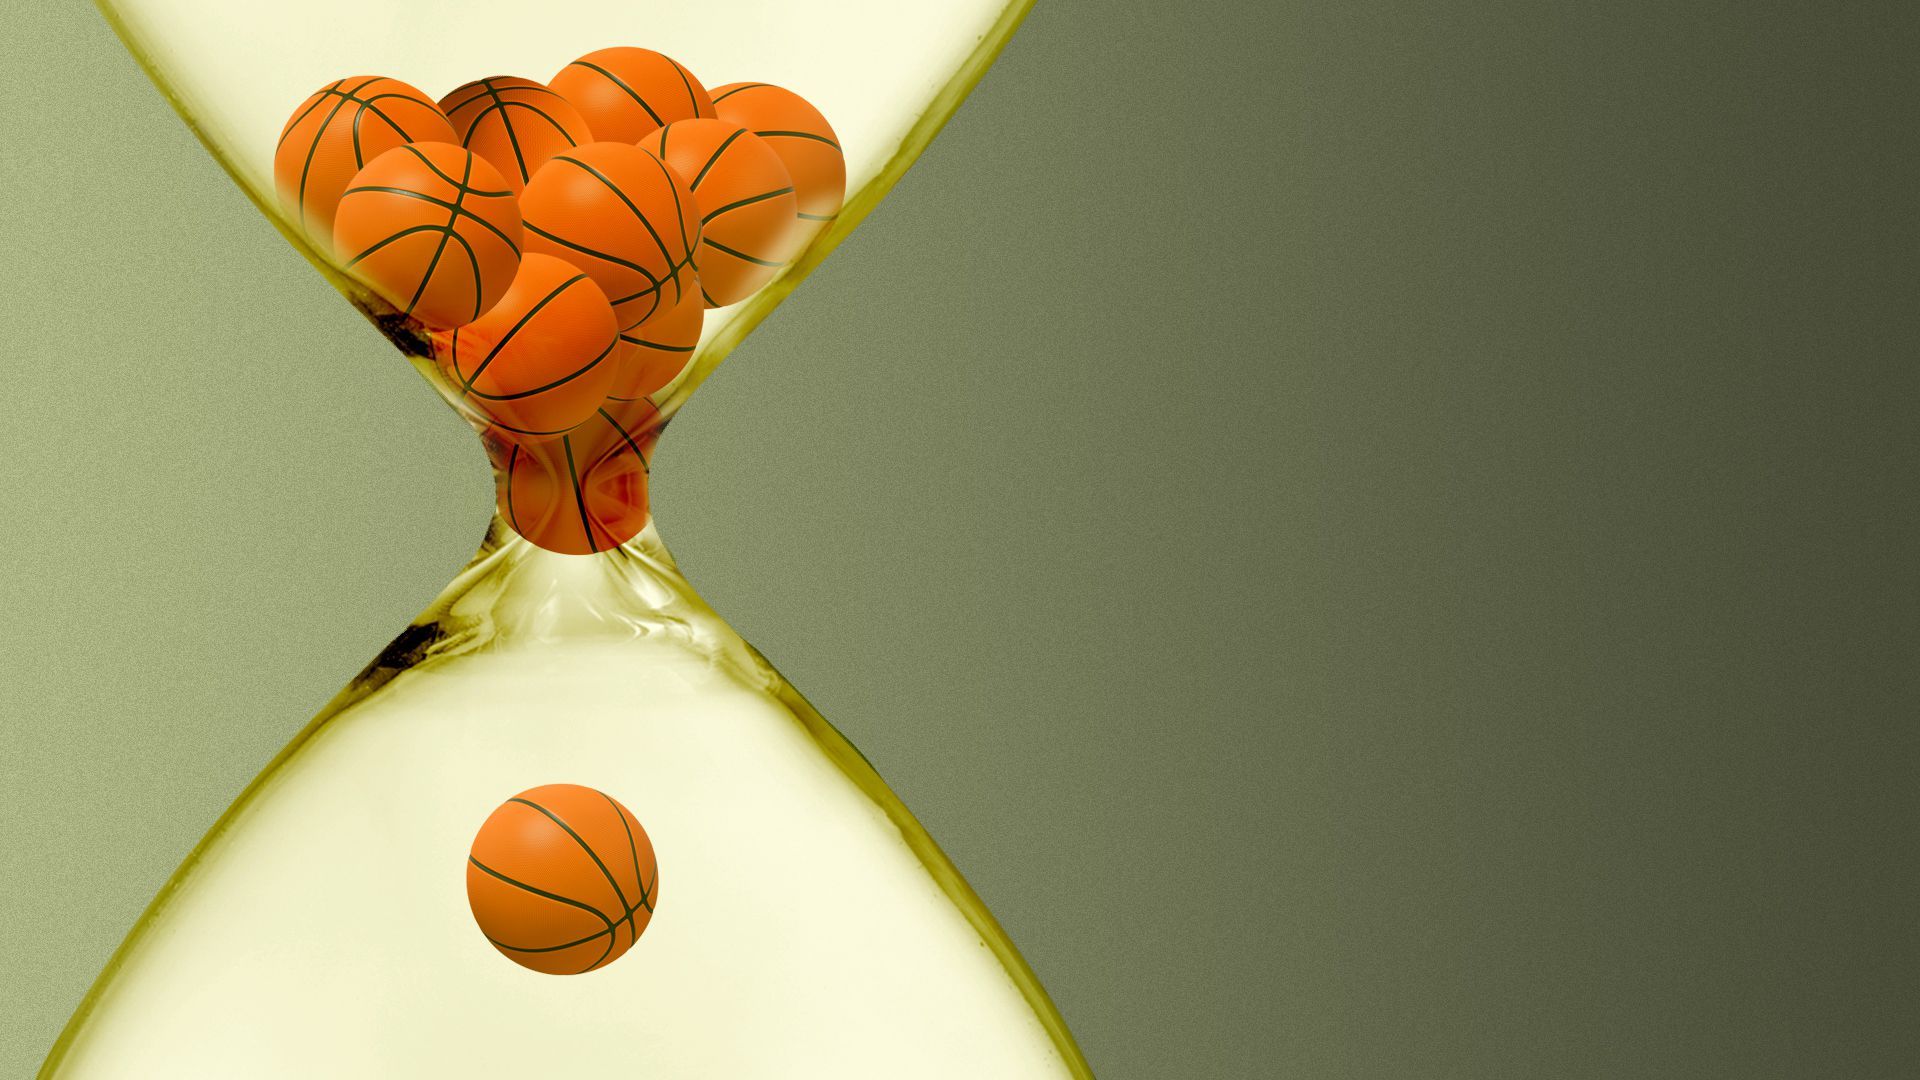 Illustration of an hourglass filled with basketballs instead of sand